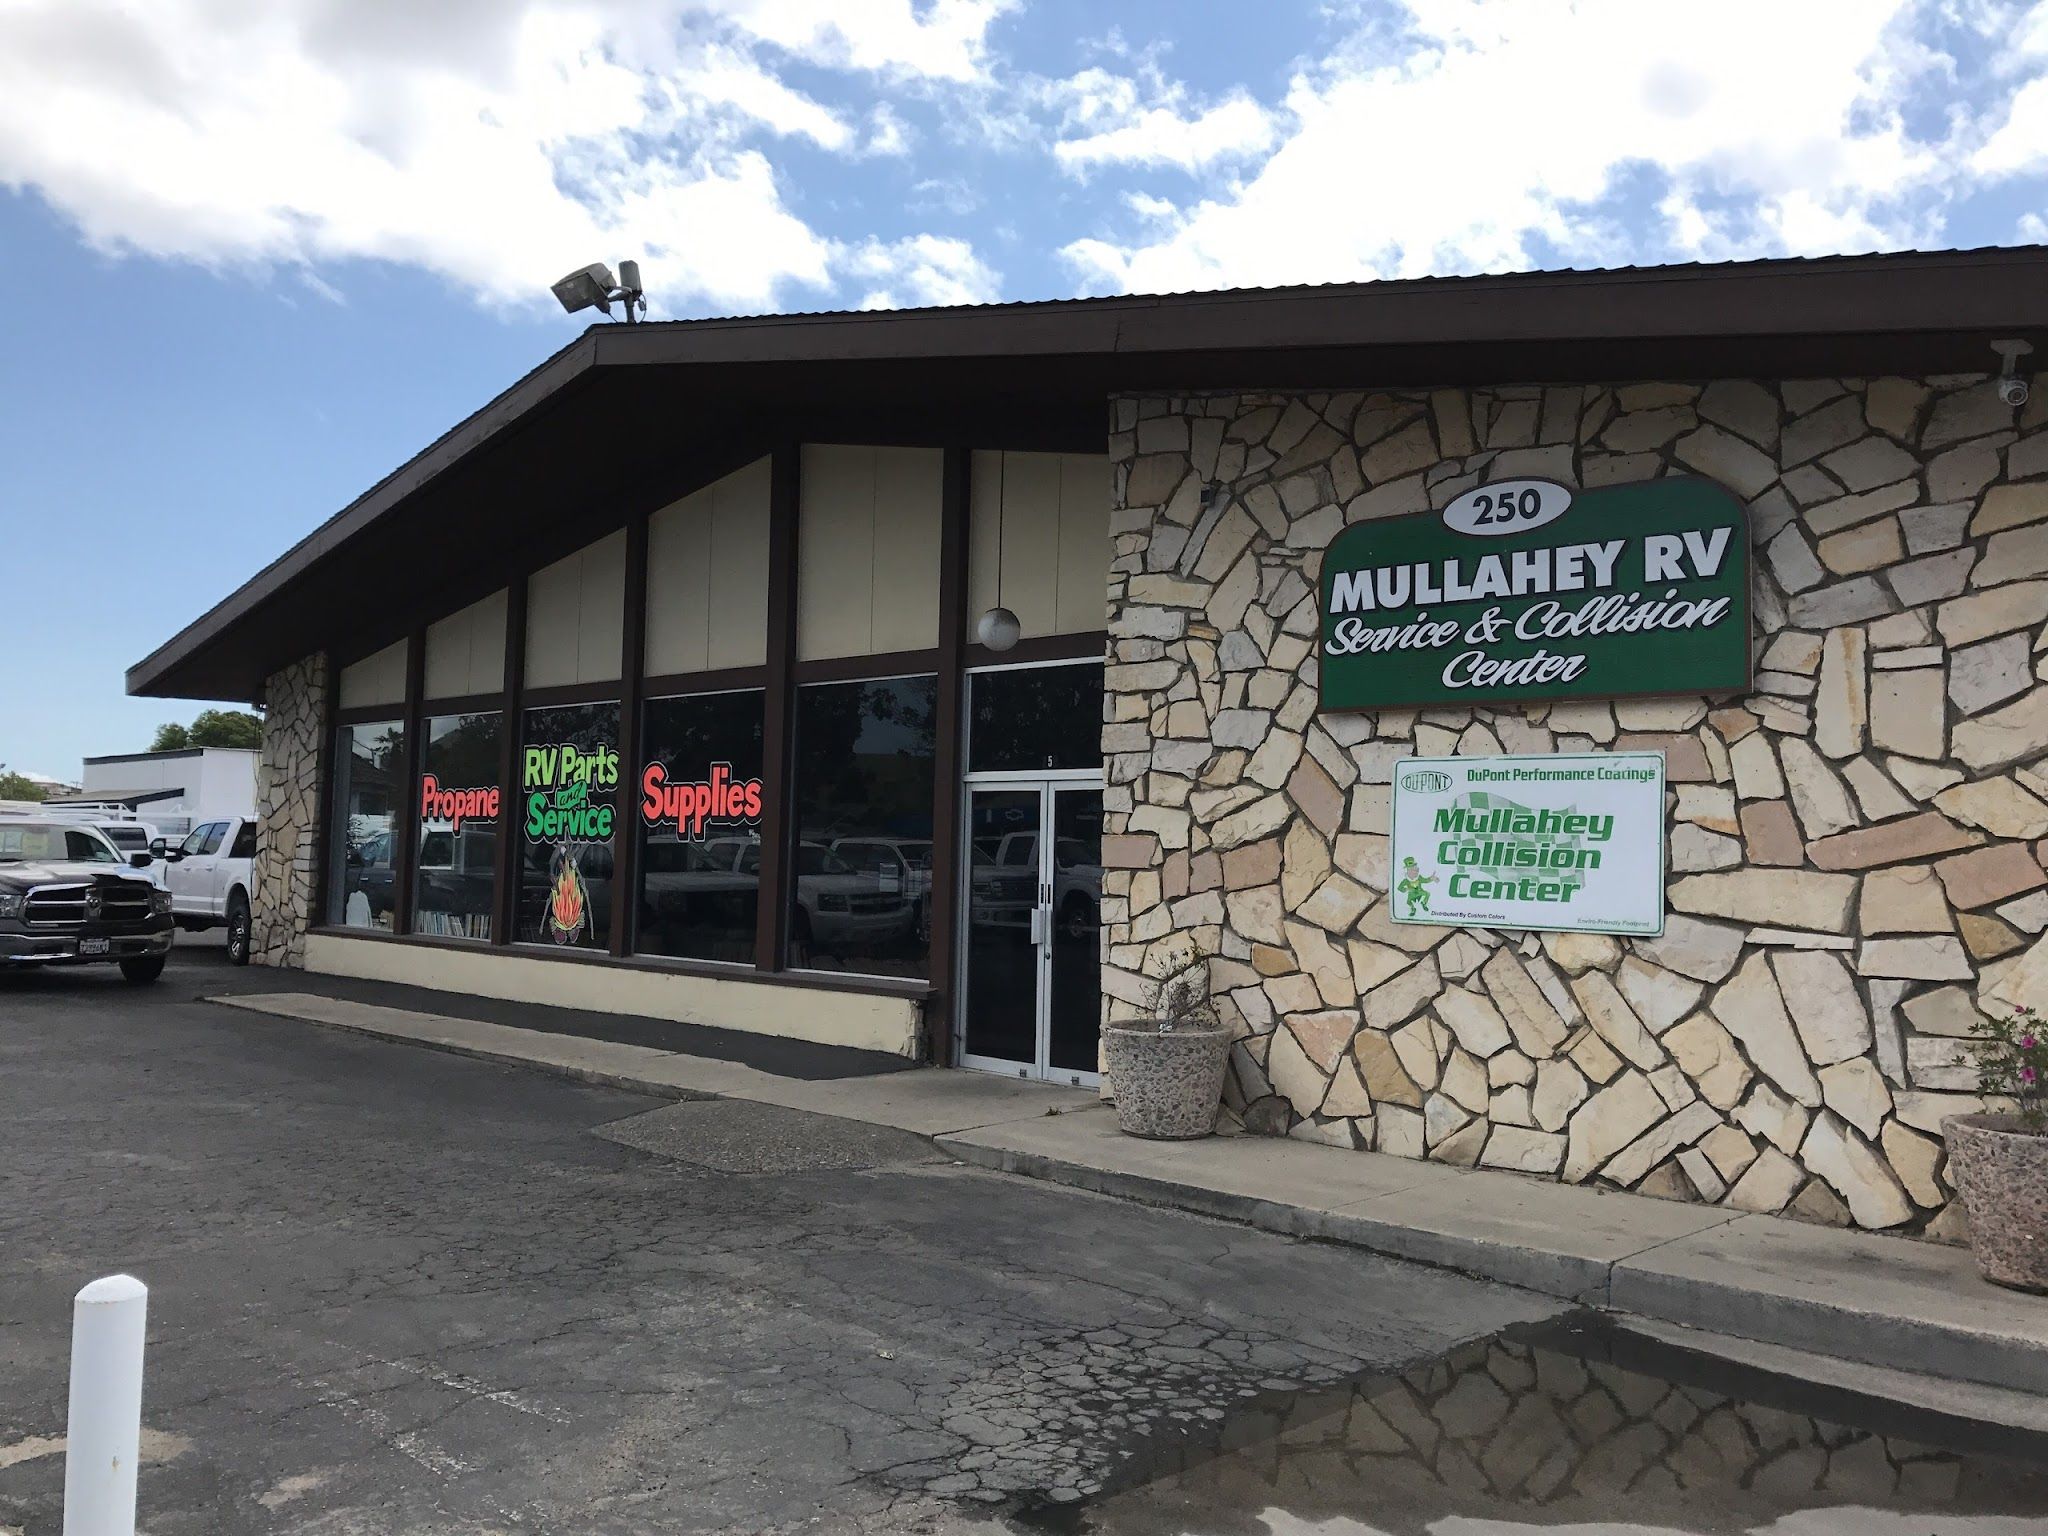 Services & Products Mullahey RV Service & Collision Center in Arroyo Grande CA